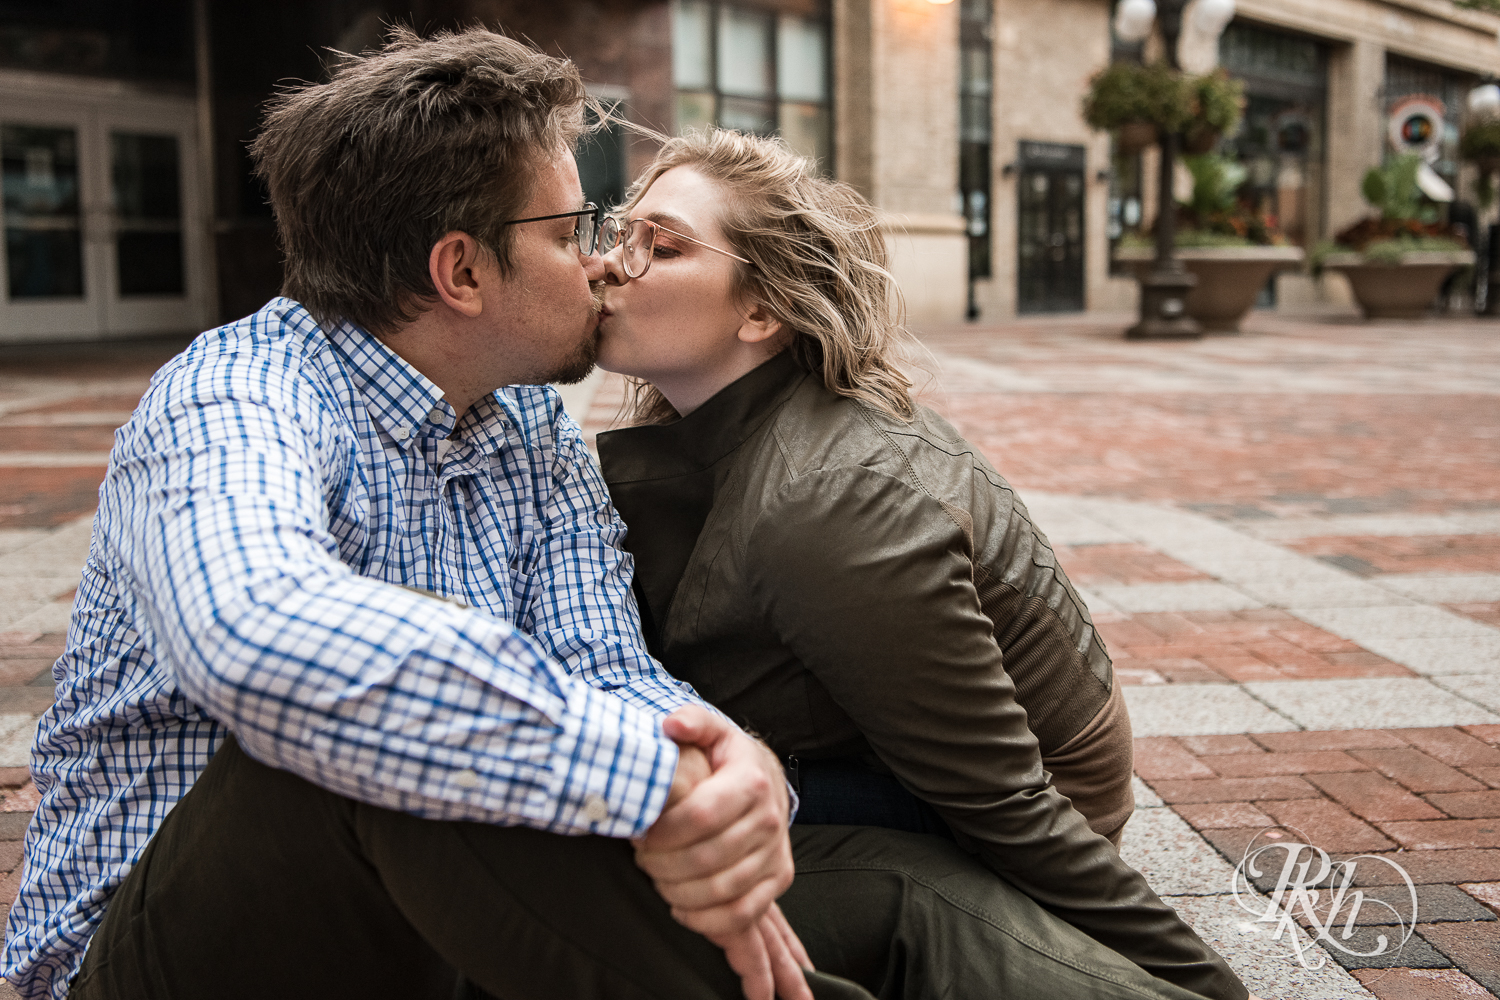 Blond woman with glasses and man with glasses kiss in front of the Palace Theater in Saint Paul, Minnesota.